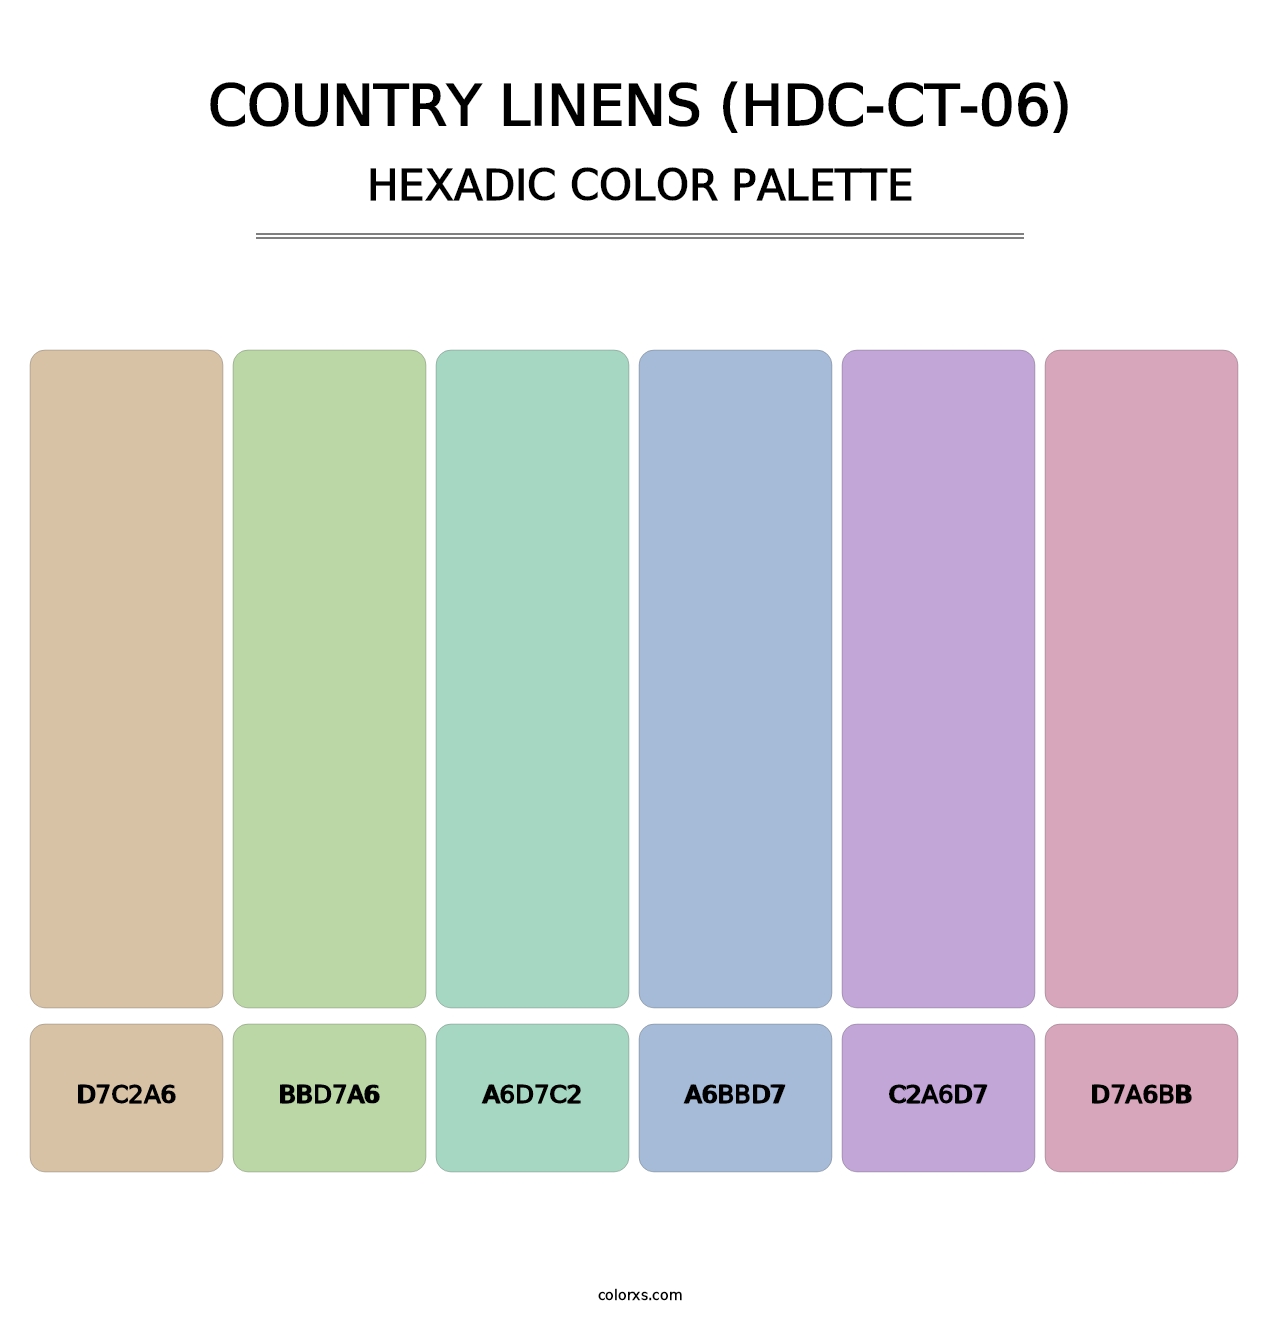 Country Linens (HDC-CT-06) - Hexadic Color Palette